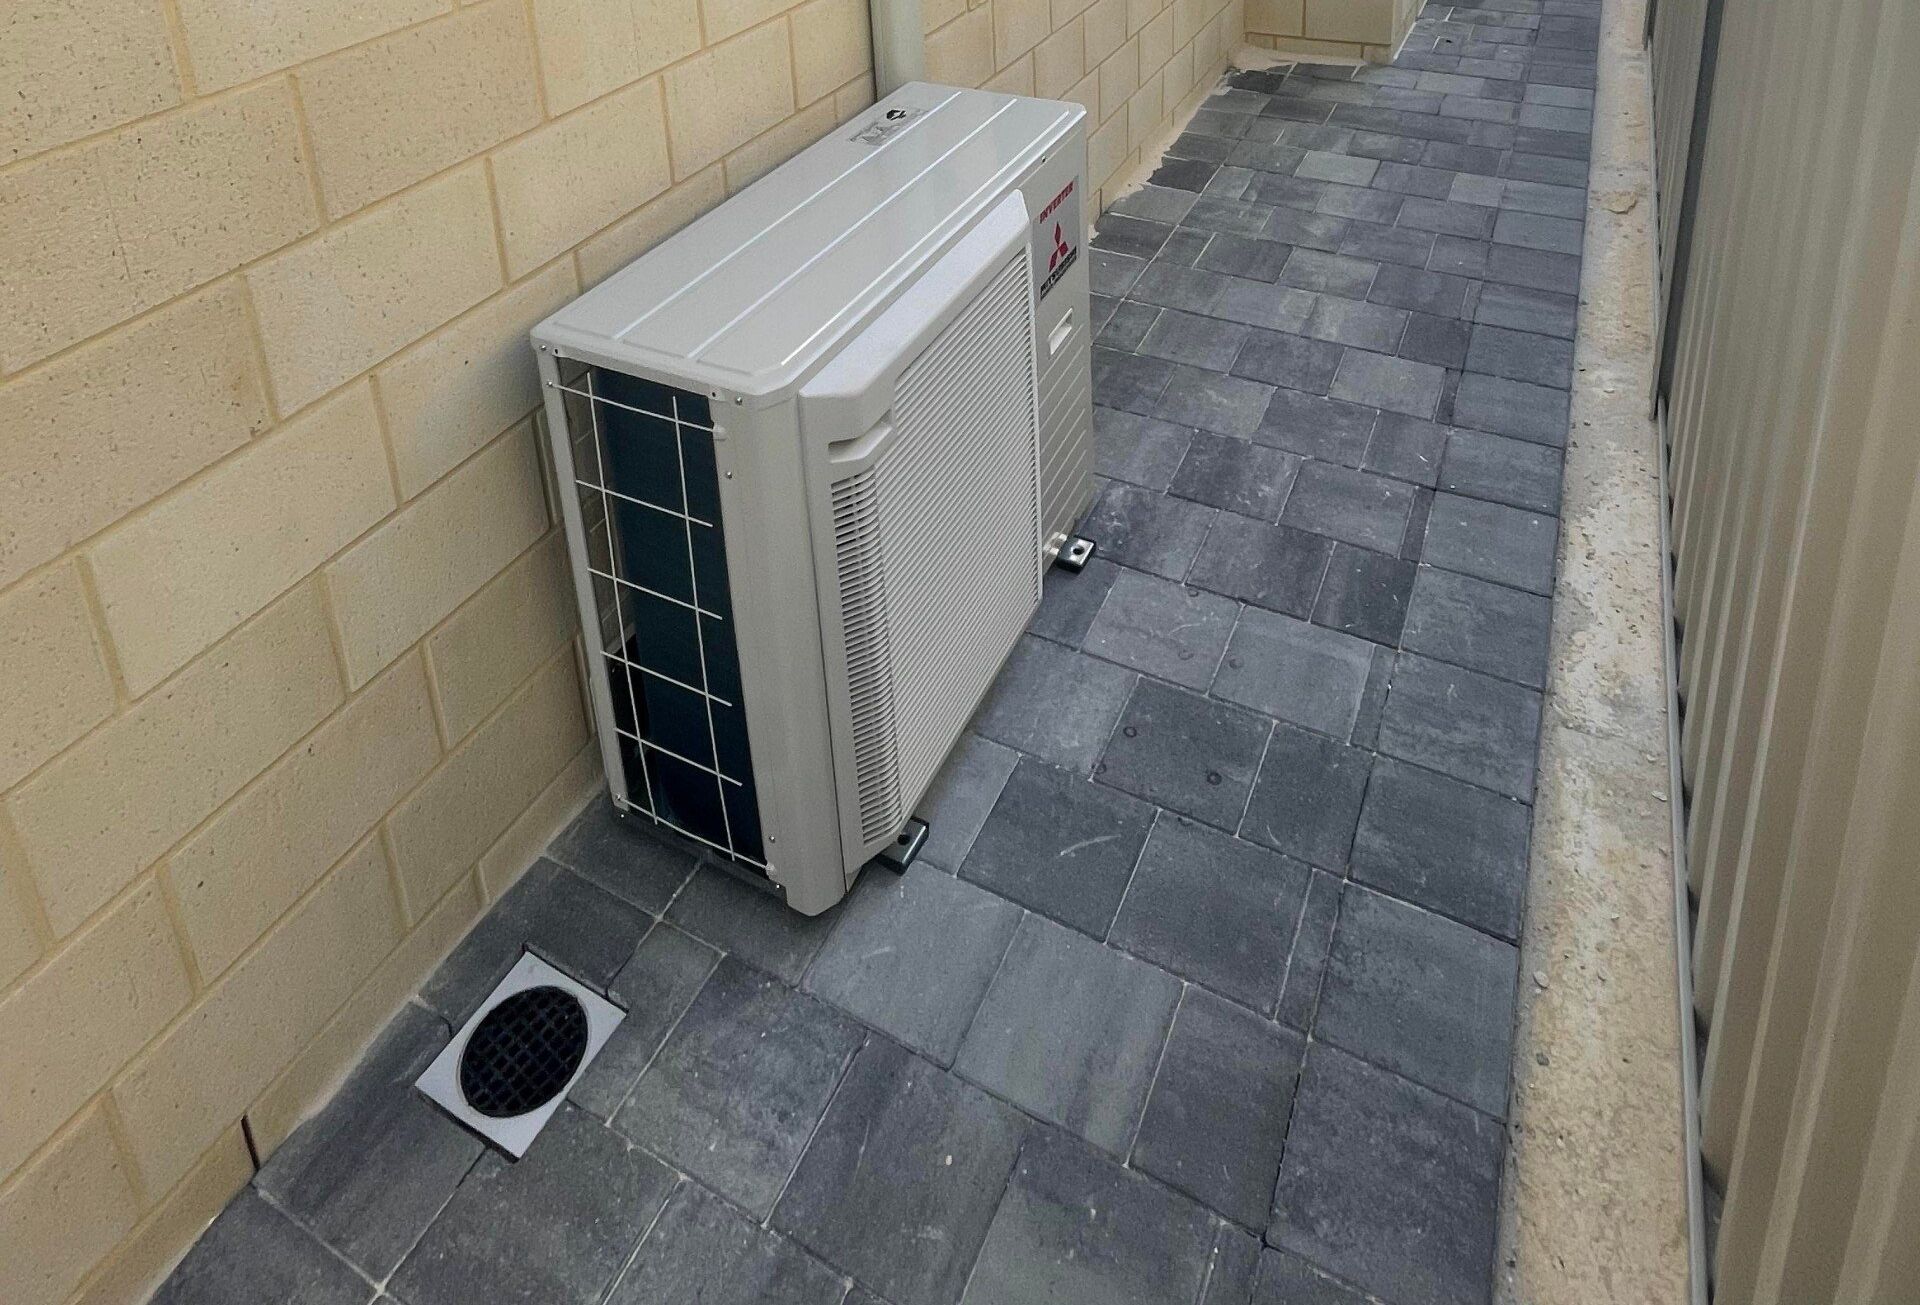 Outdoor Split System Air Conditioning Unit Installed on External Wall of House